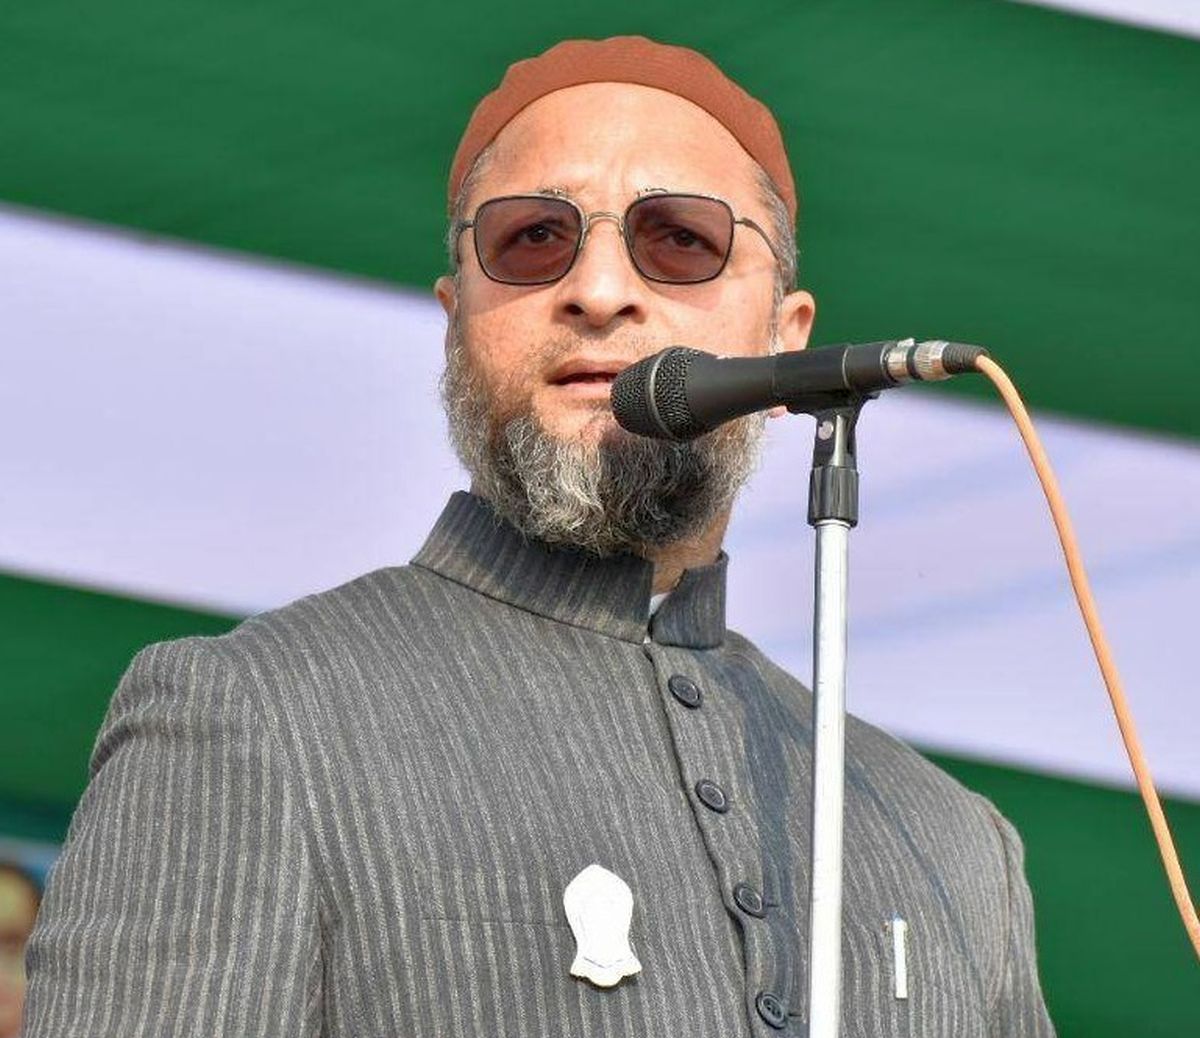 Why Owaisi wants weak PM and 'khichdi' govt in India